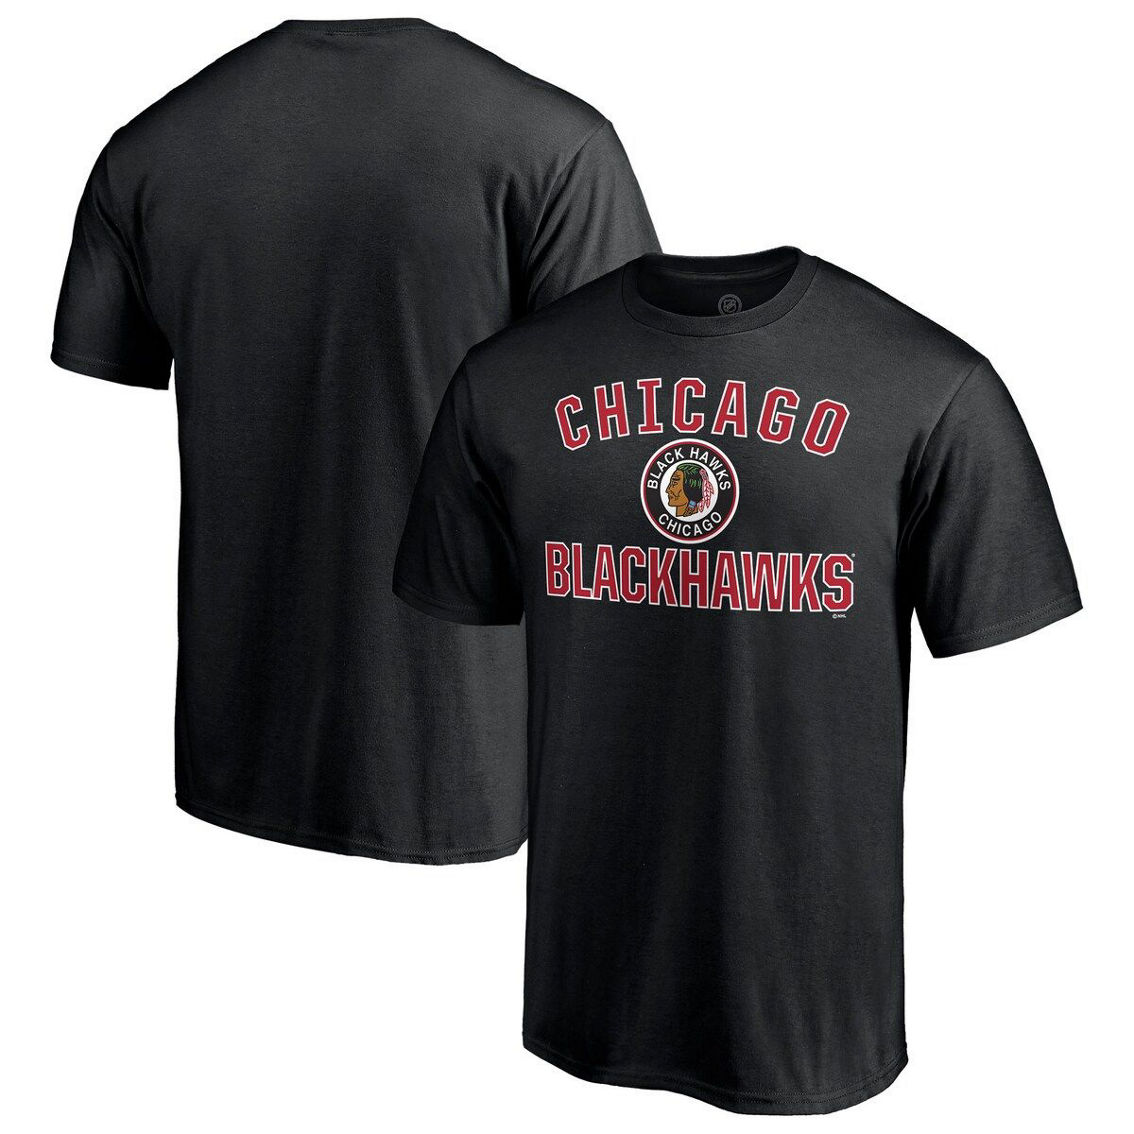 Fanatics Branded Men's Black Chicago Blackhawks Special Edition Victory Arch T-Shirt - Image 2 of 4